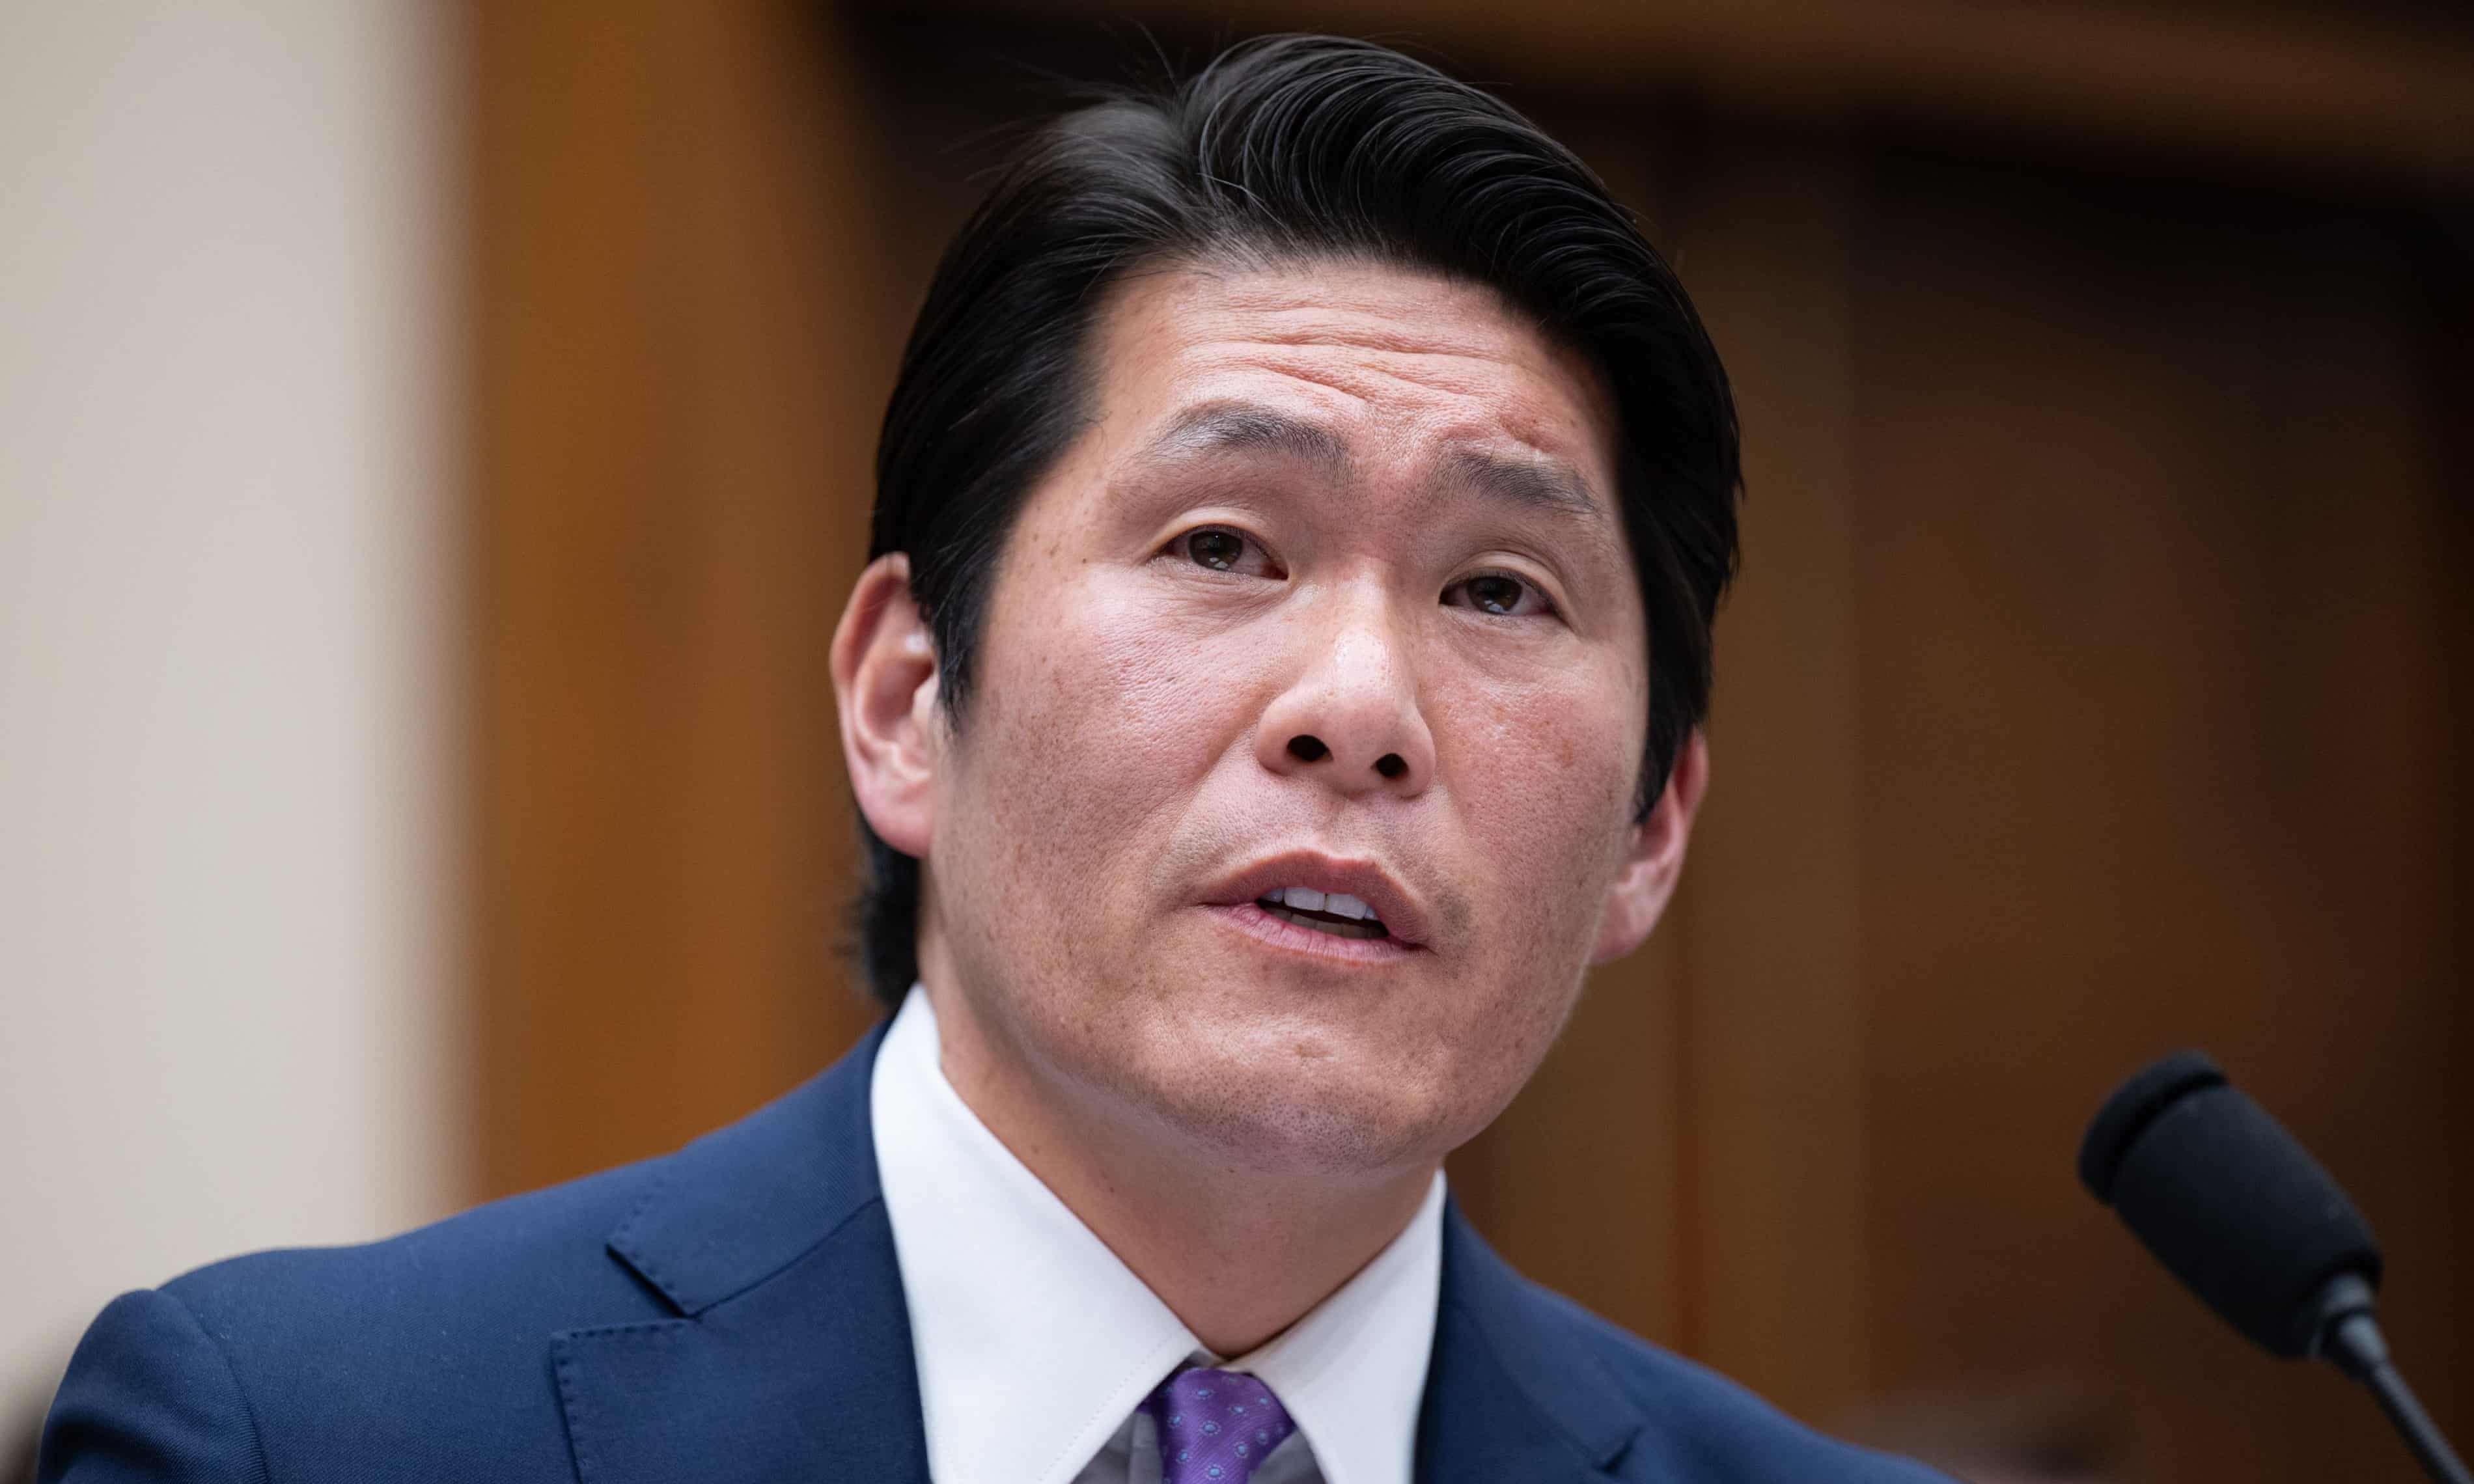 No-so-stealth politician: Robert Hur says he ‘did not exonerate’ Biden and refuses to rule out role in a Trump administration (theguardian.com)